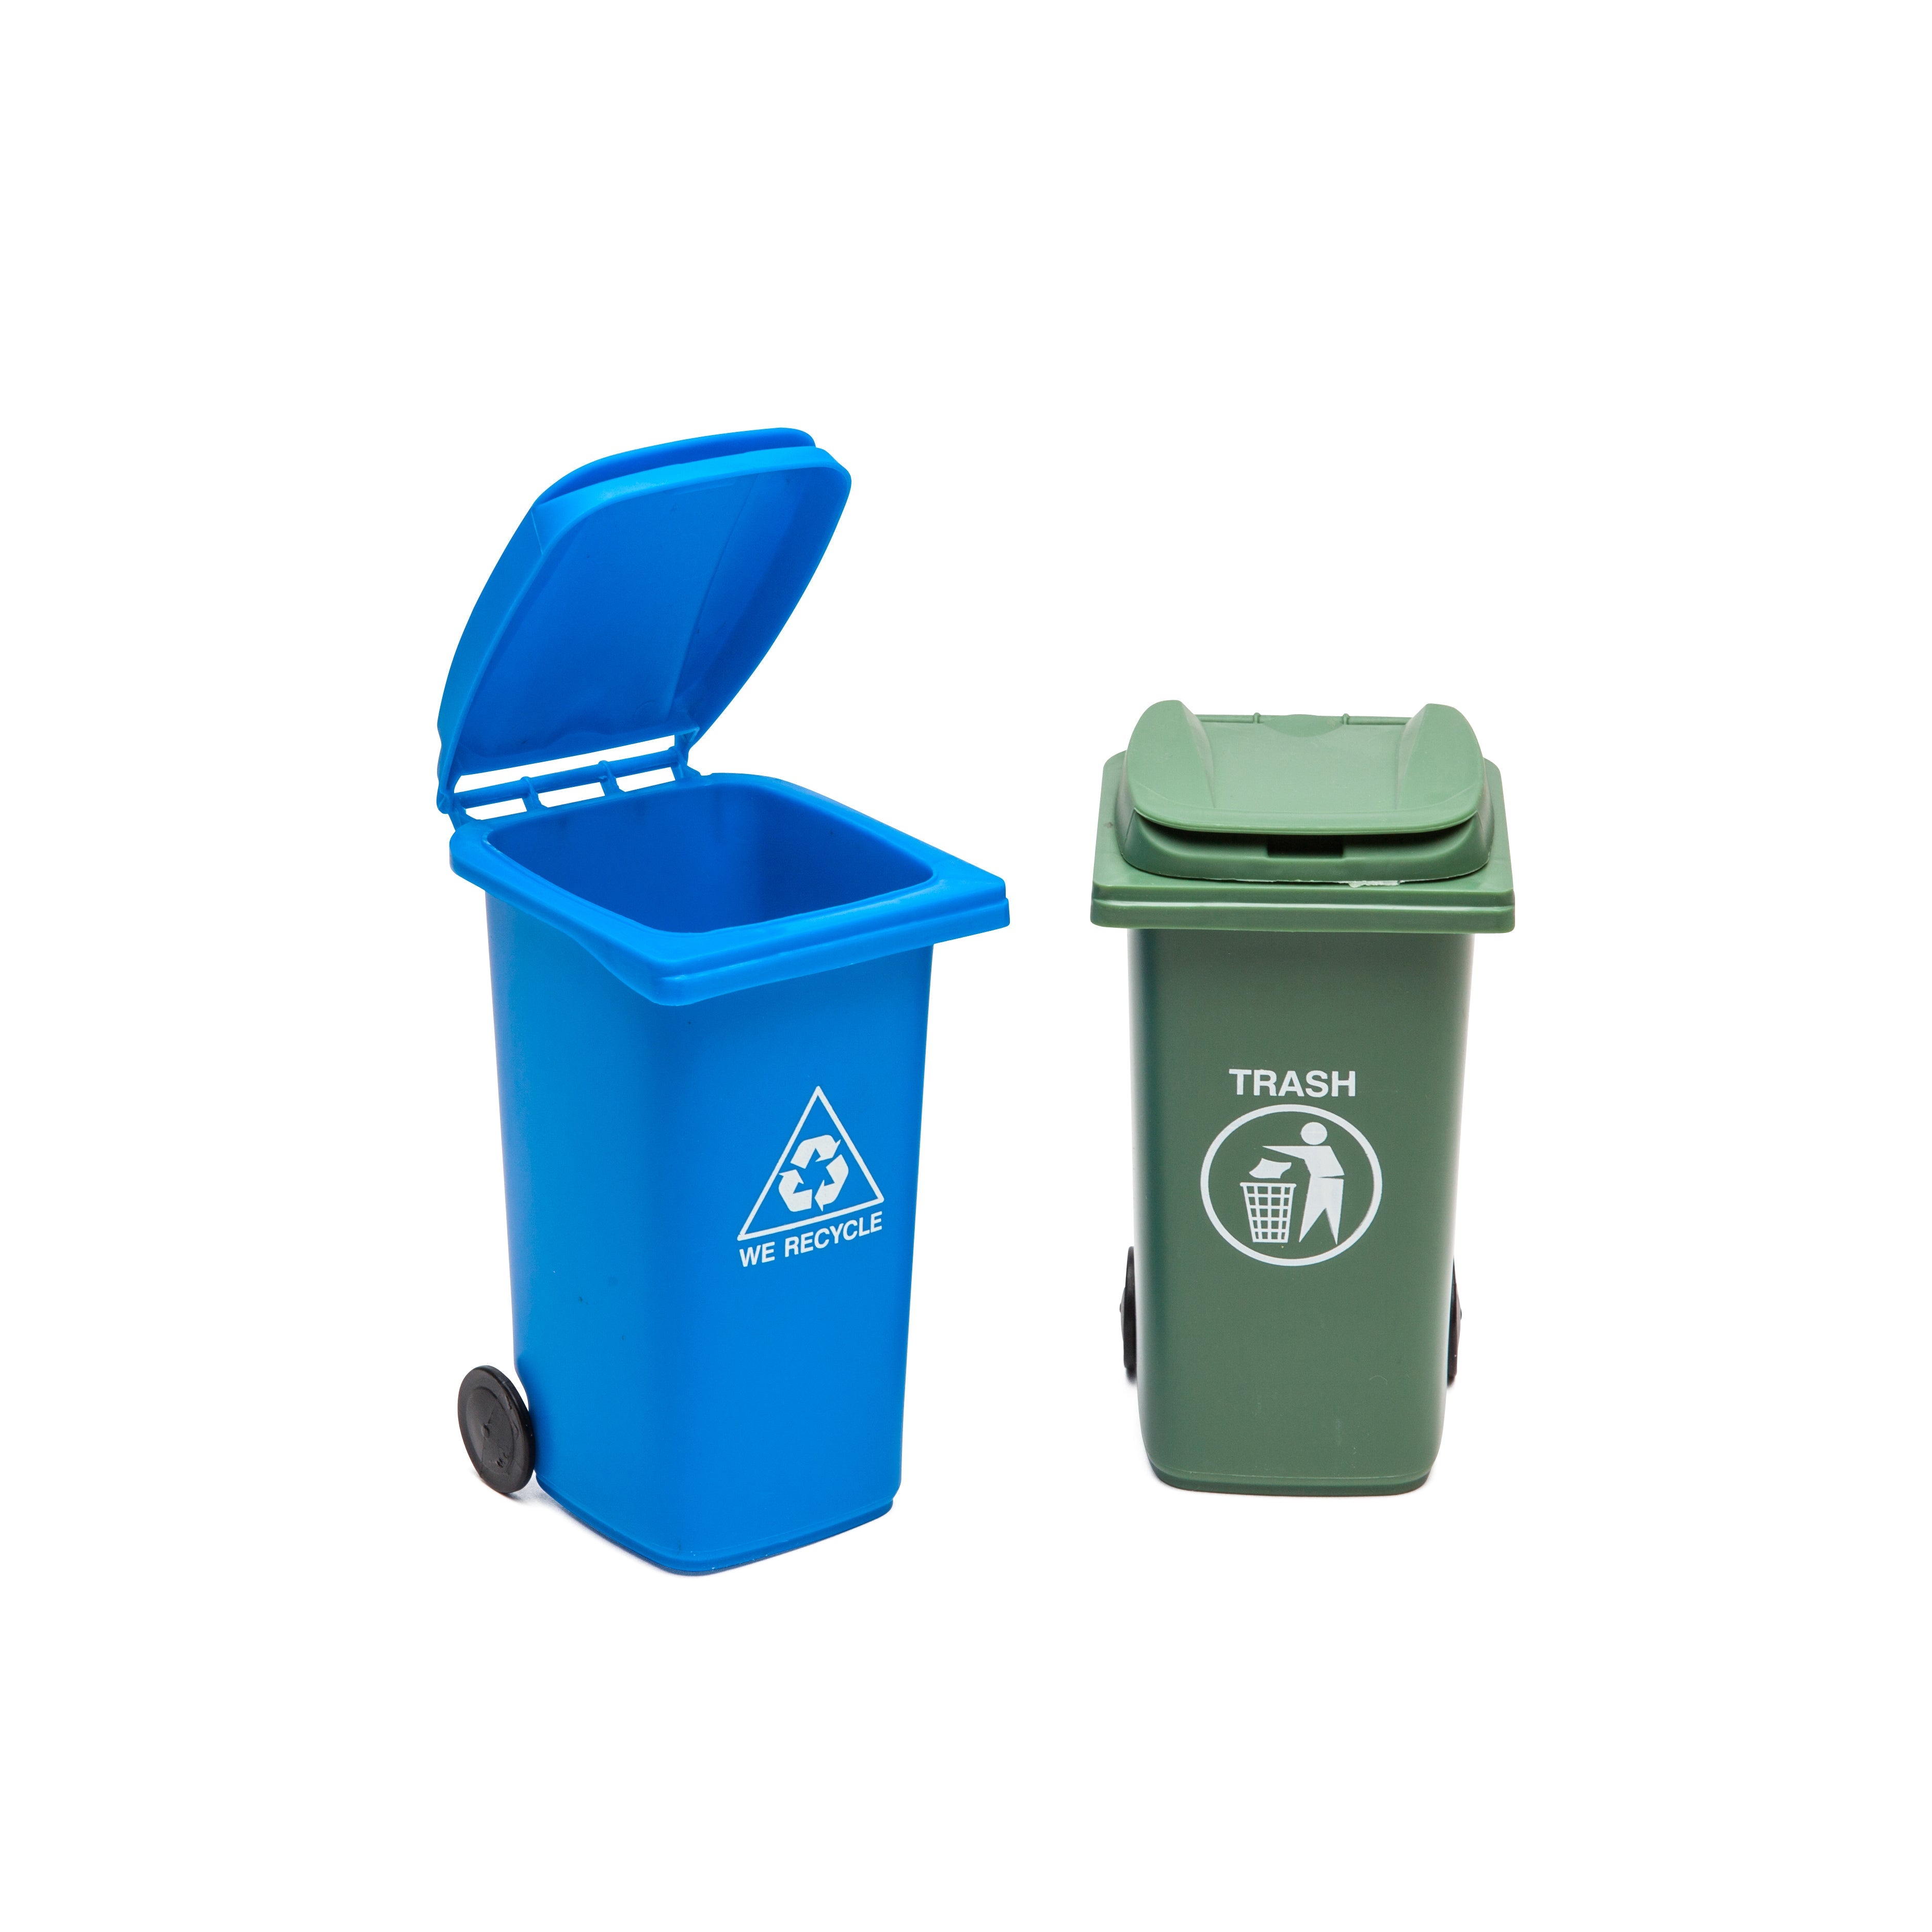 Mini Trash Can and Recycle Can Desk Set